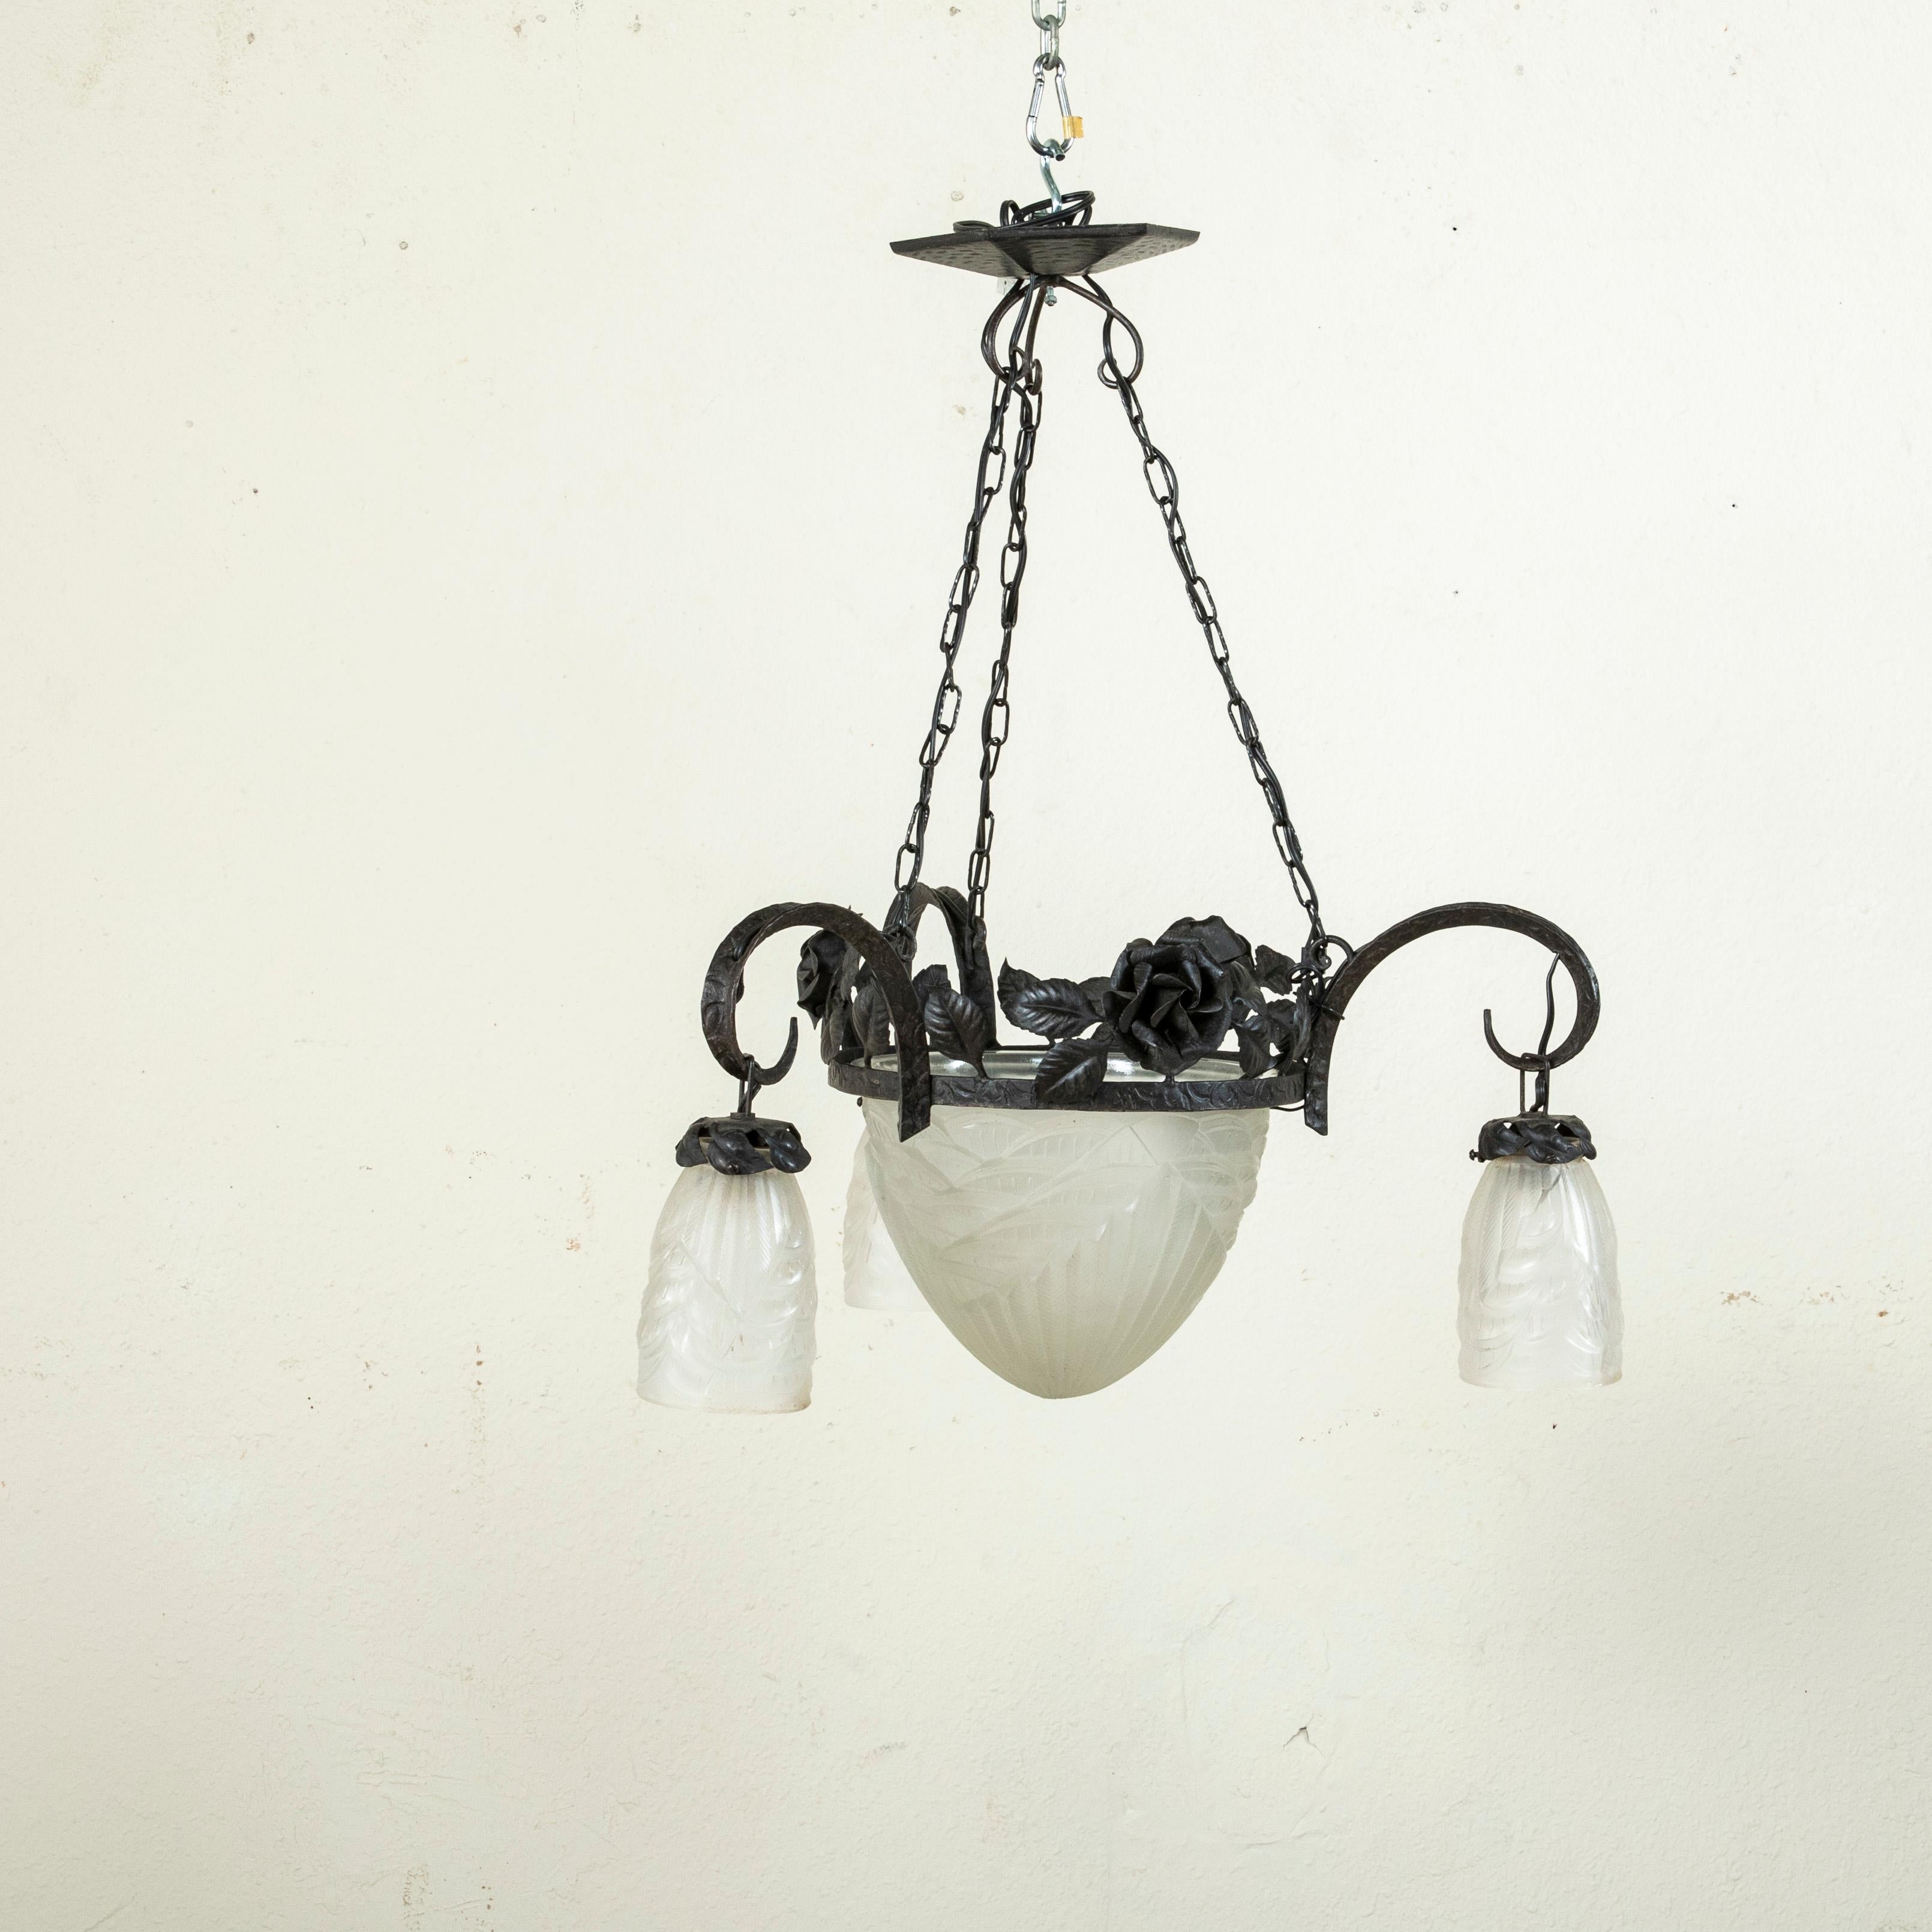 Early 20th Century French Art Deco Period Iron and Glass Chandelier, Four Lights For Sale 2